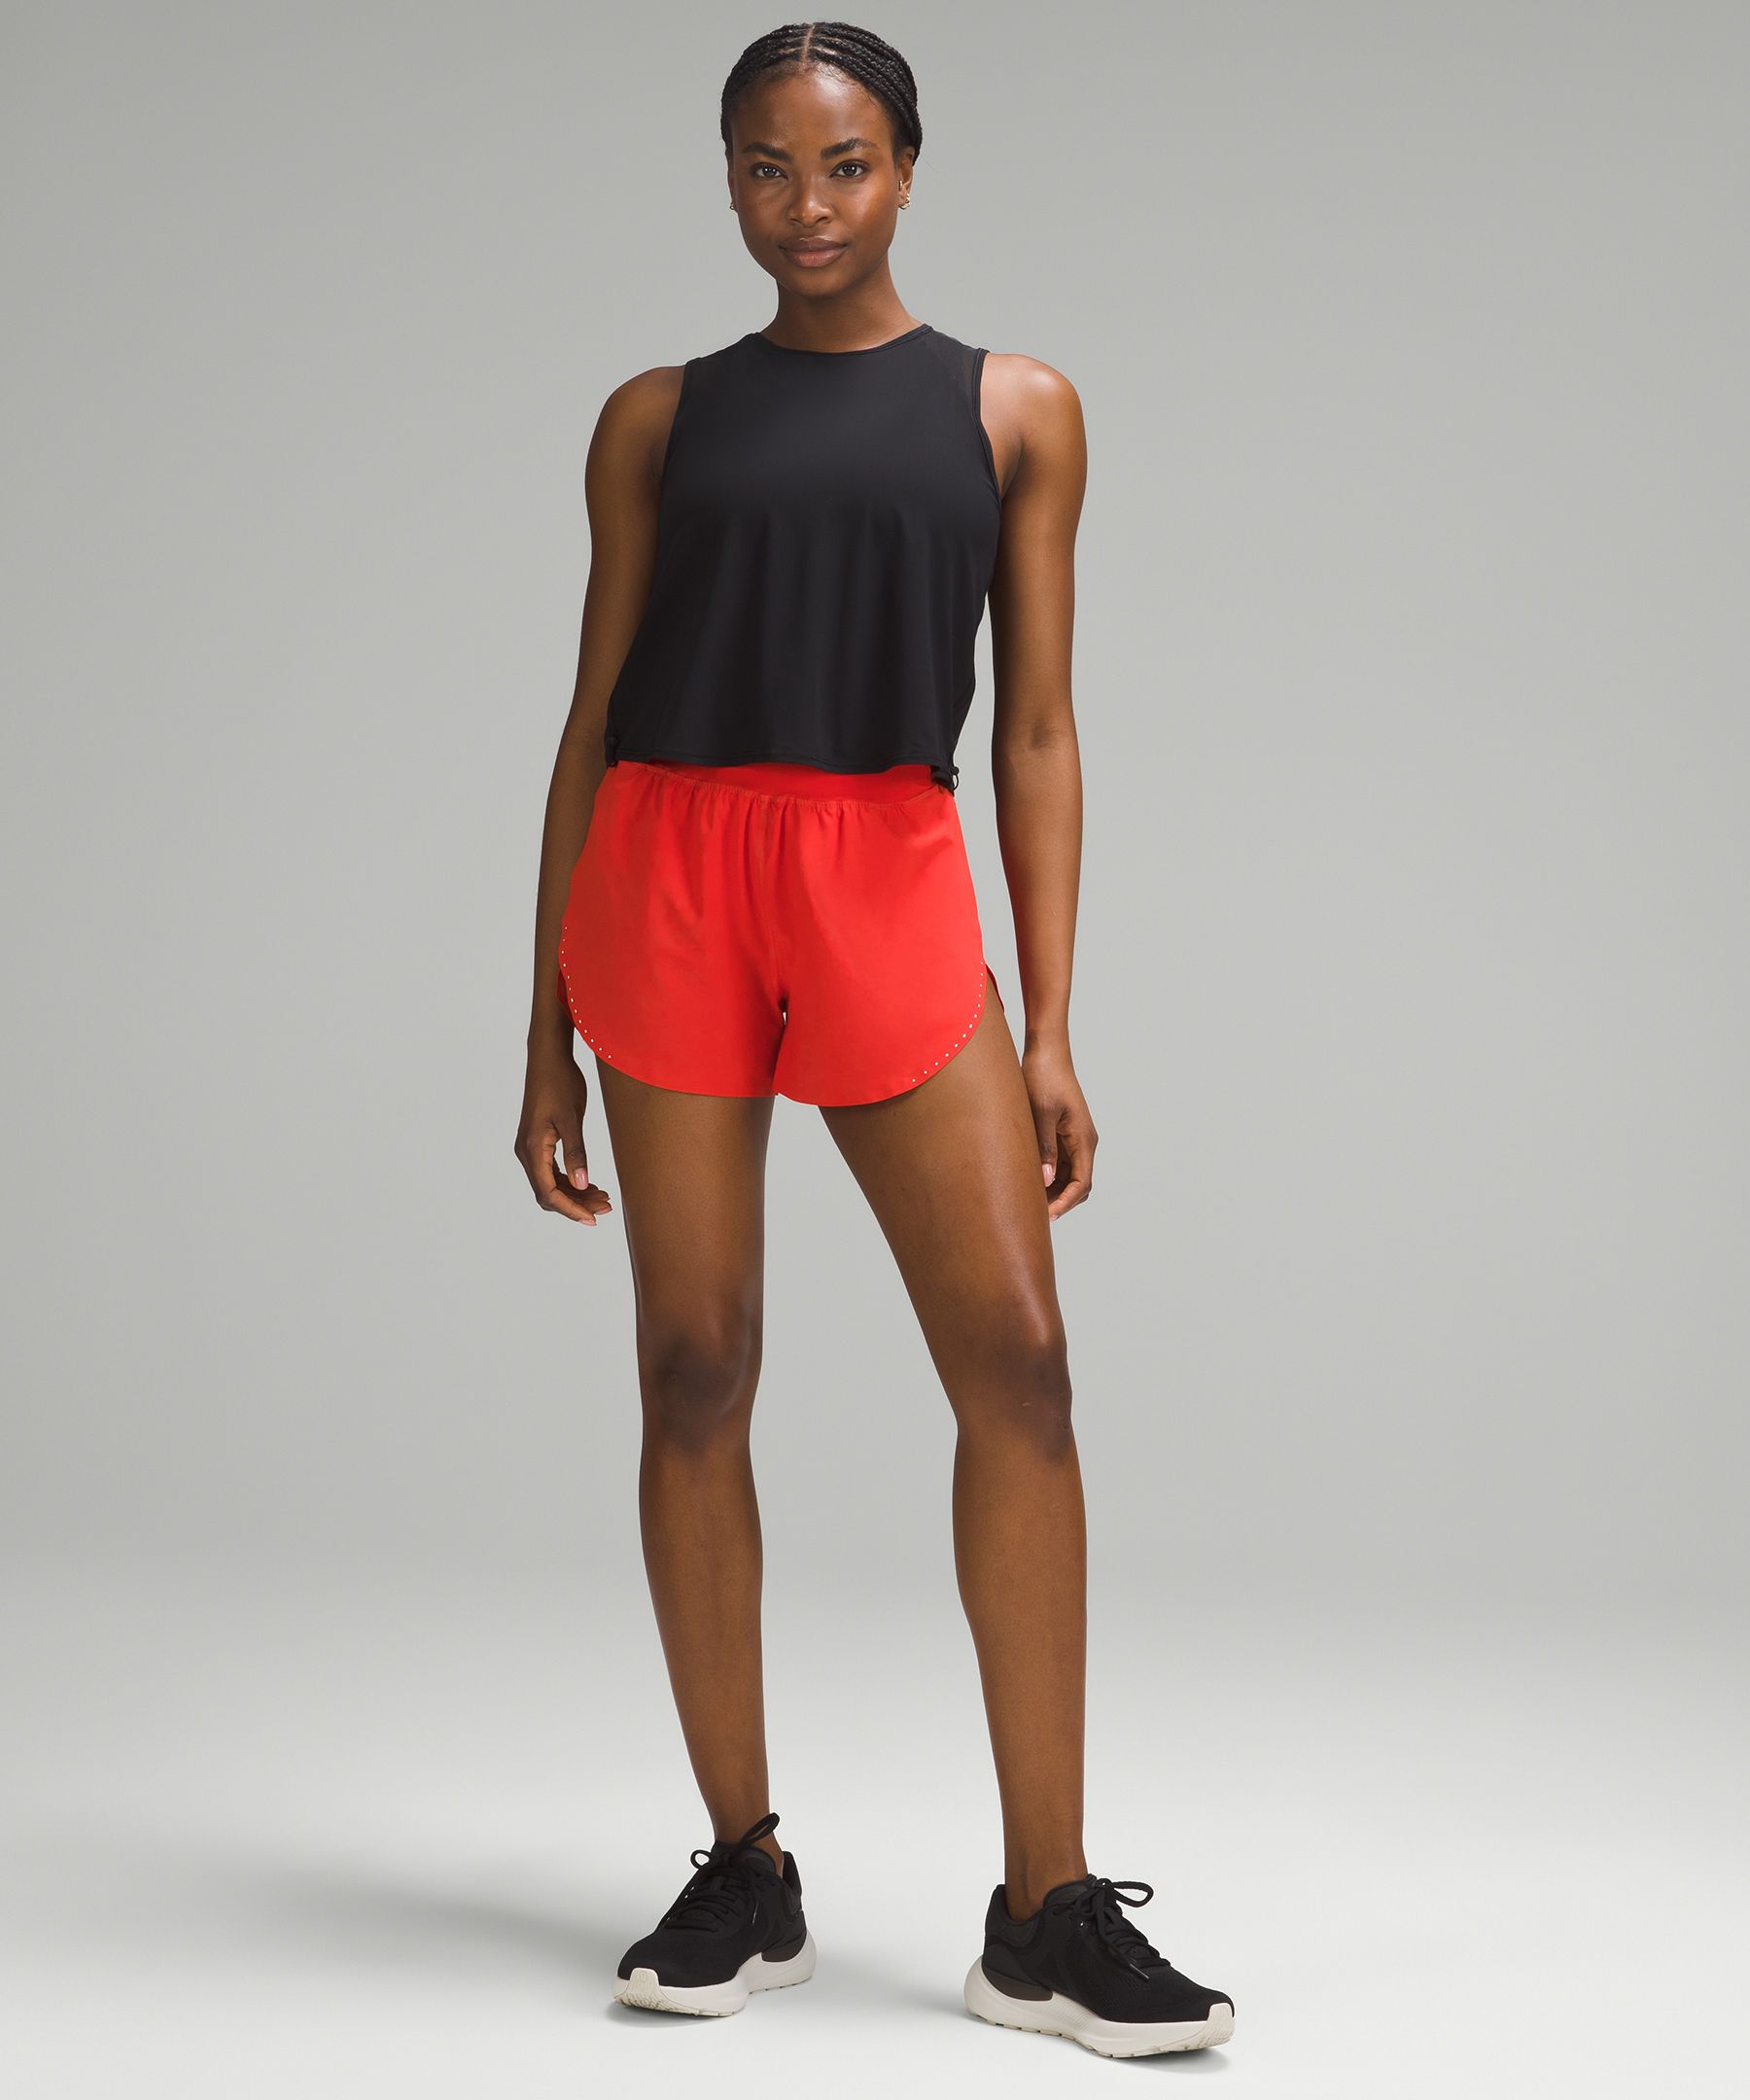 Lululemon Fast and Free Short 3 - Lined – The Shop at Equinox